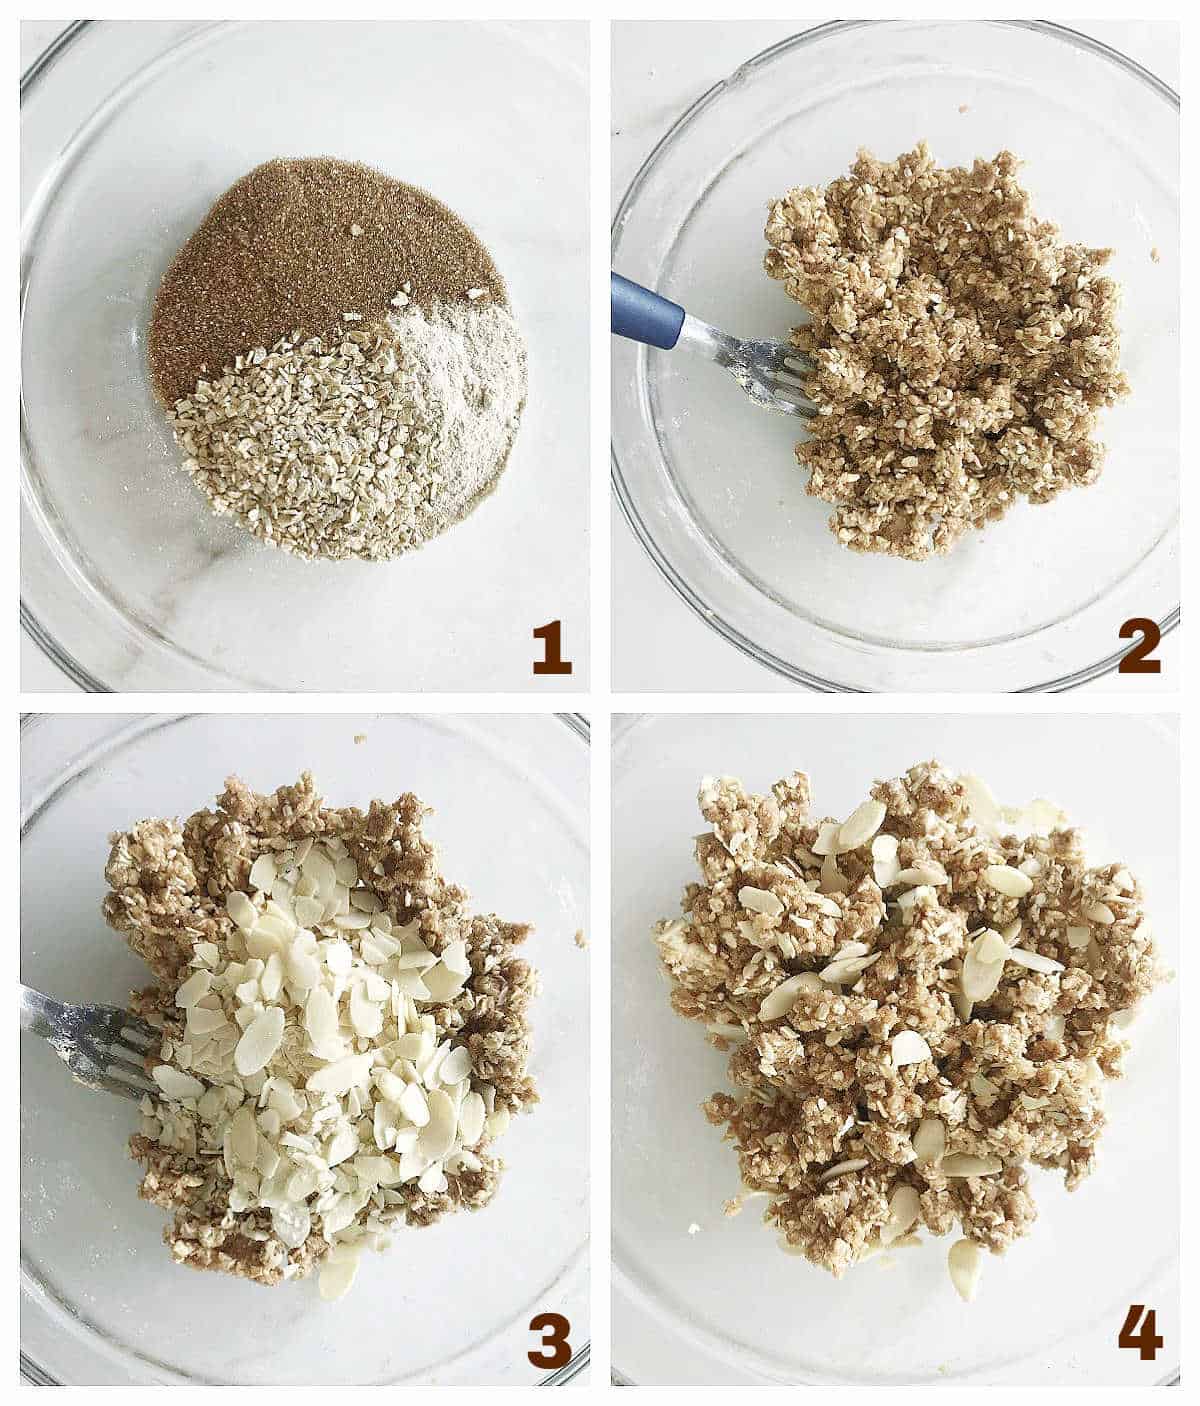 Four image collage showing process for making crumble with oats and brown sugar and sliced almonds.